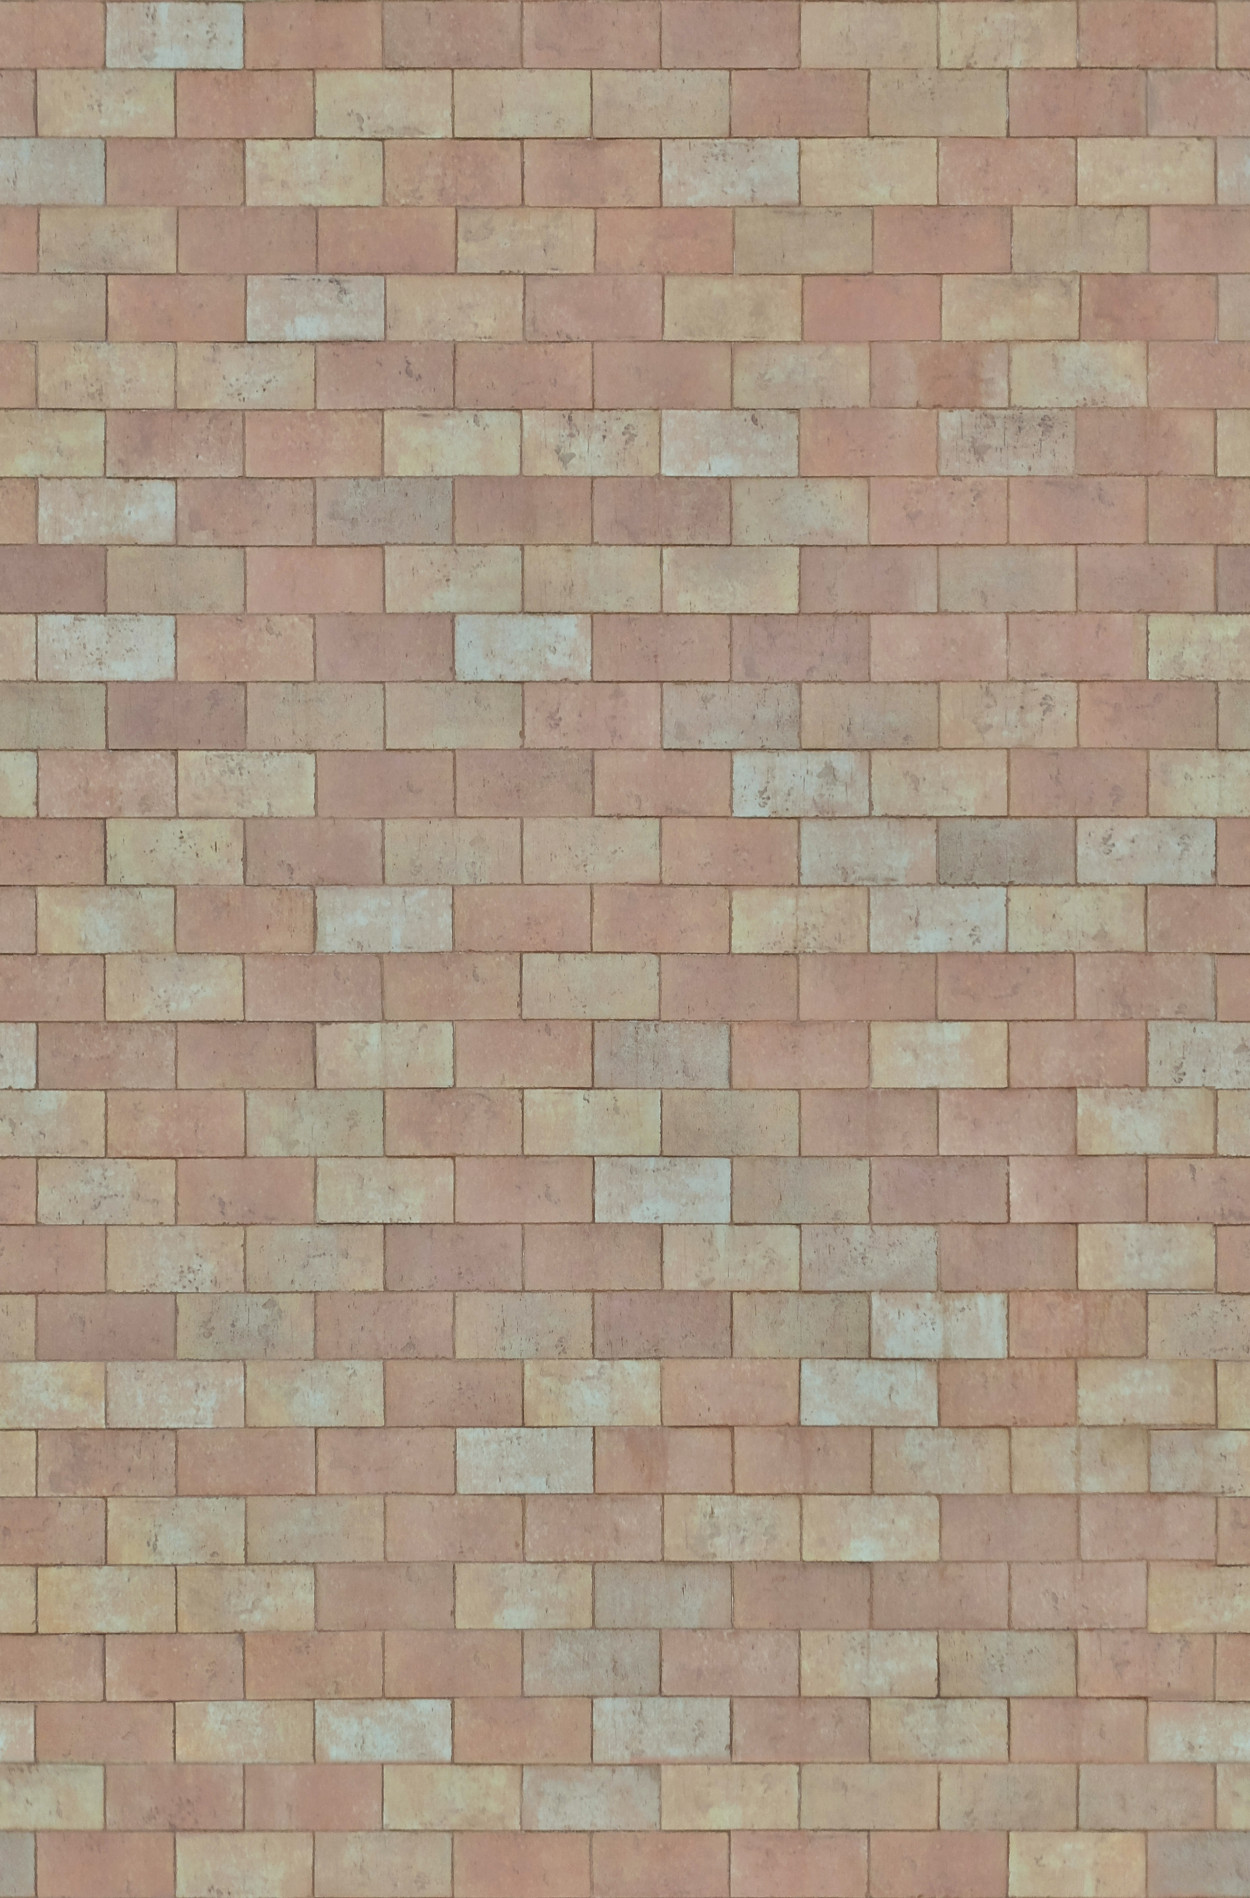 A seamless paving tiles texture for use in architectural drawings and 3D models